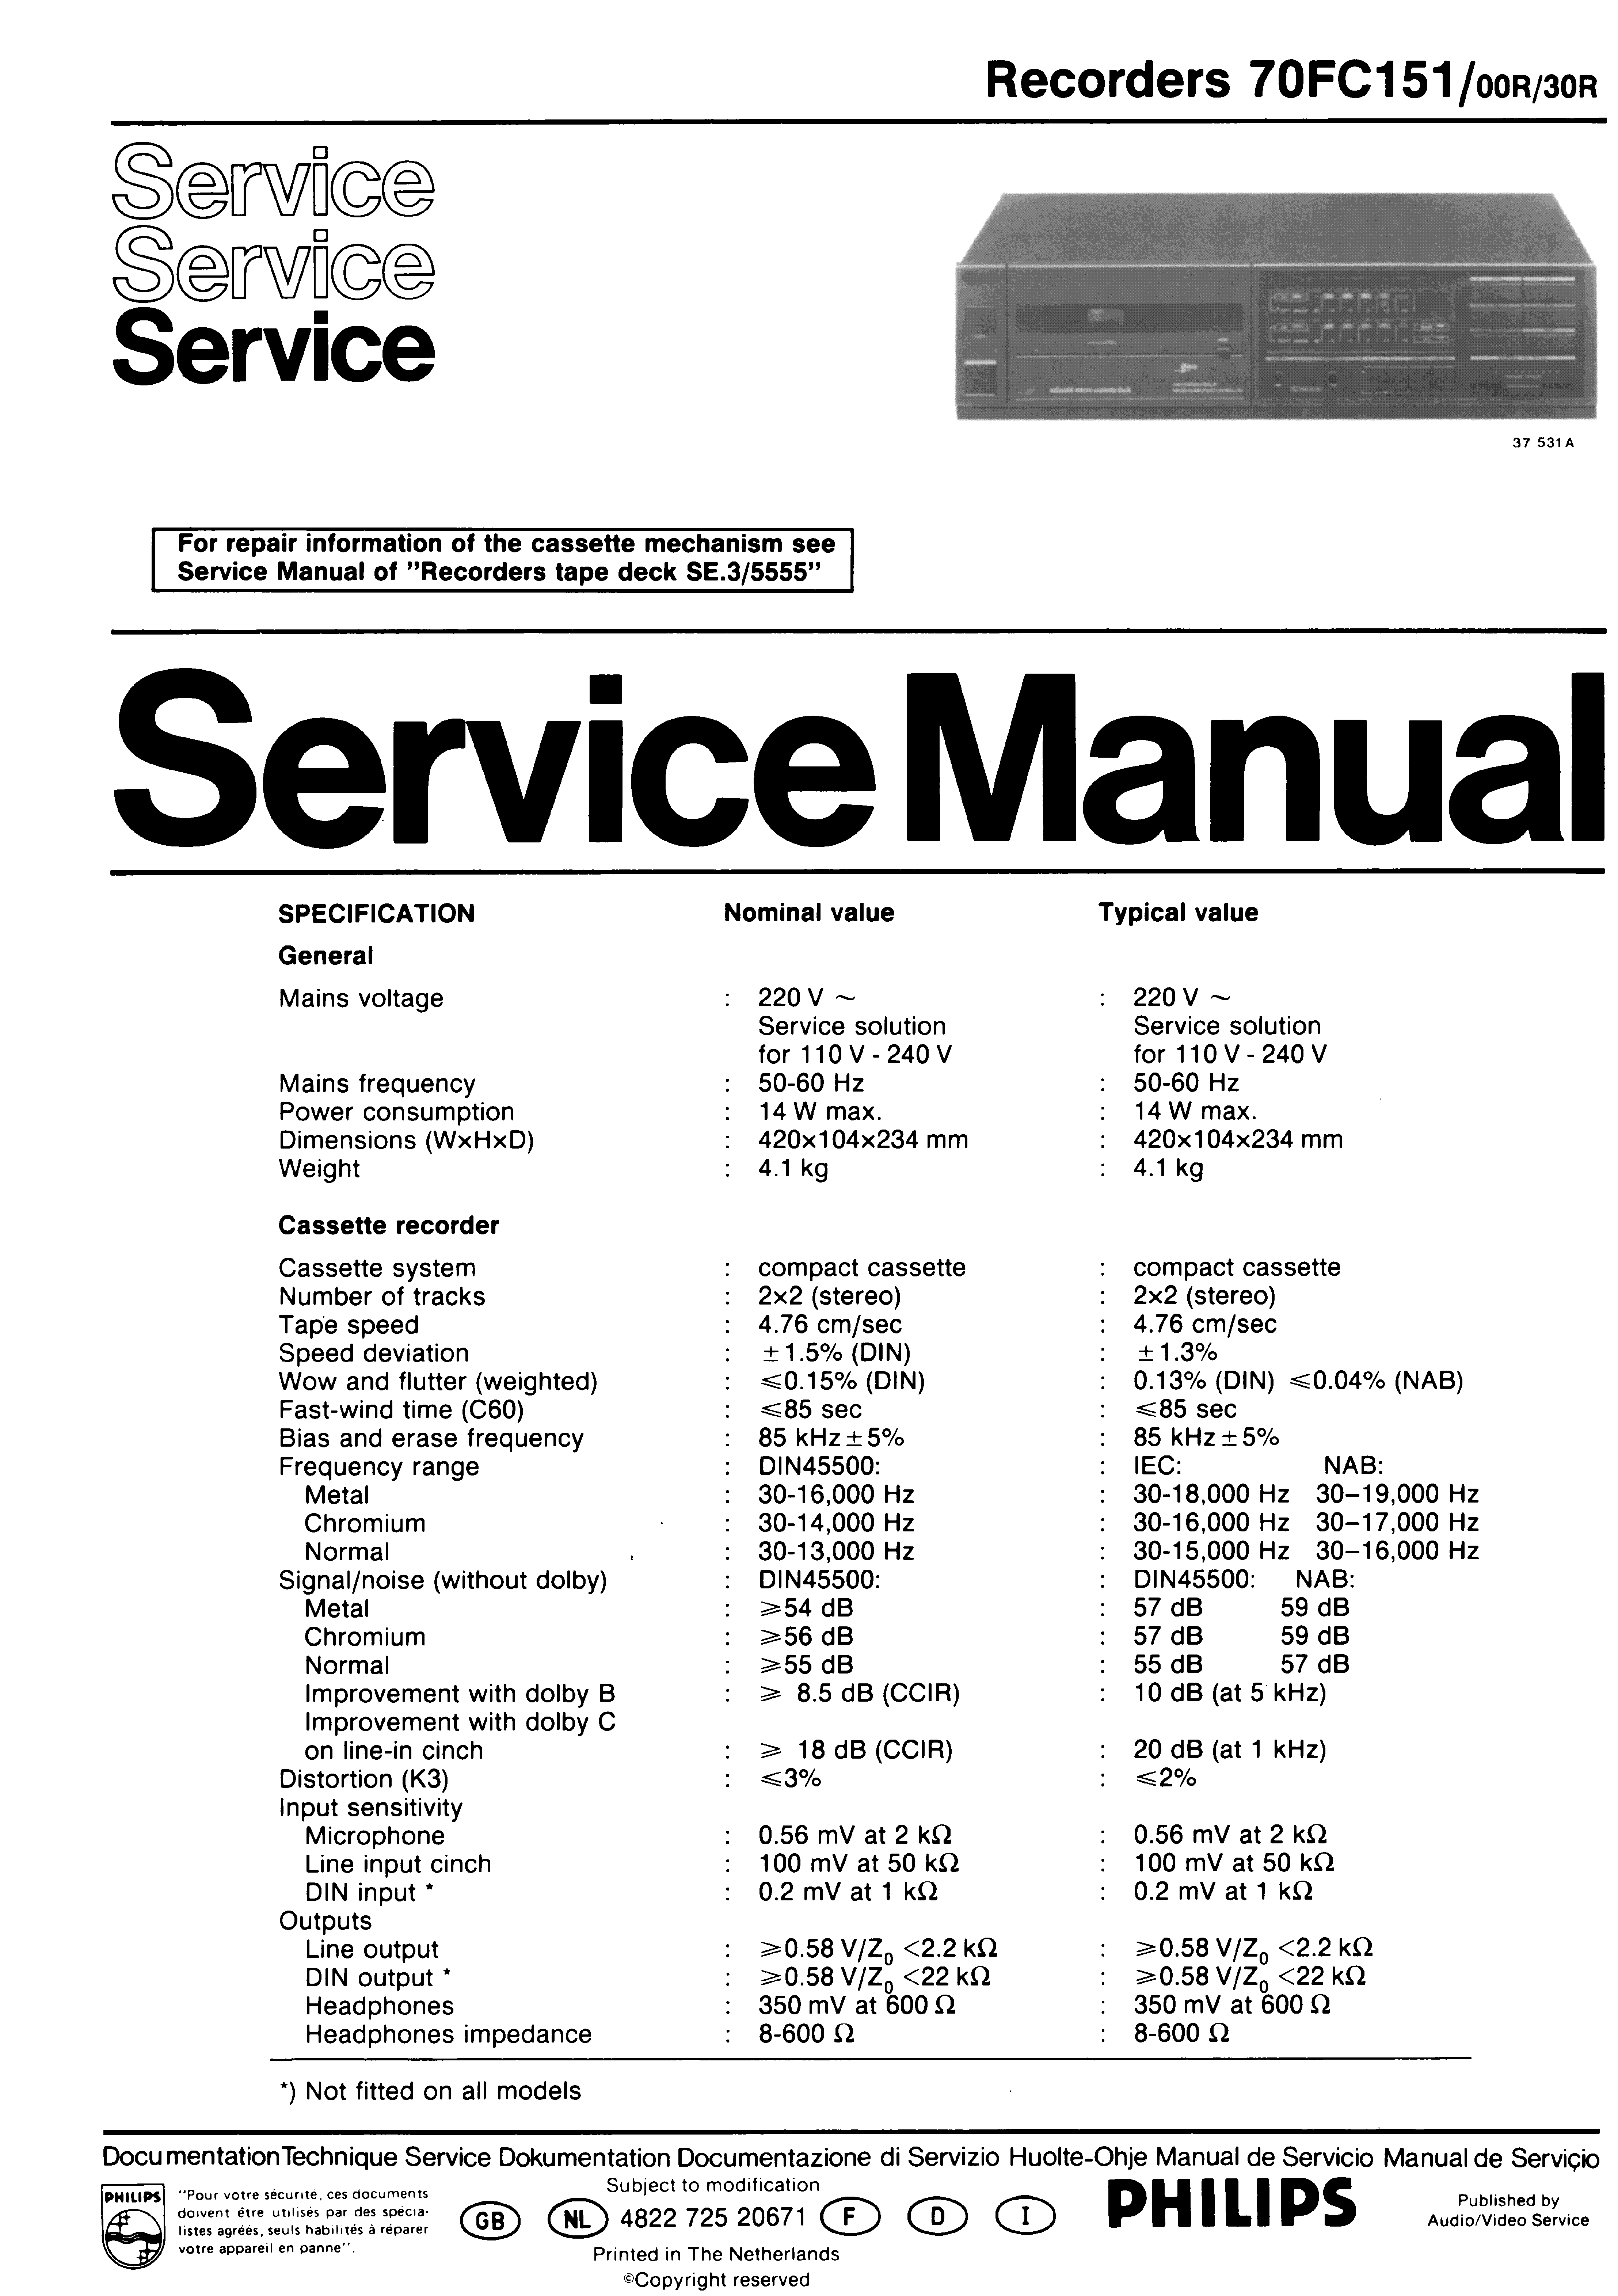 PHILIPS RECORDERS 70FC151 SM service manual (1st page)